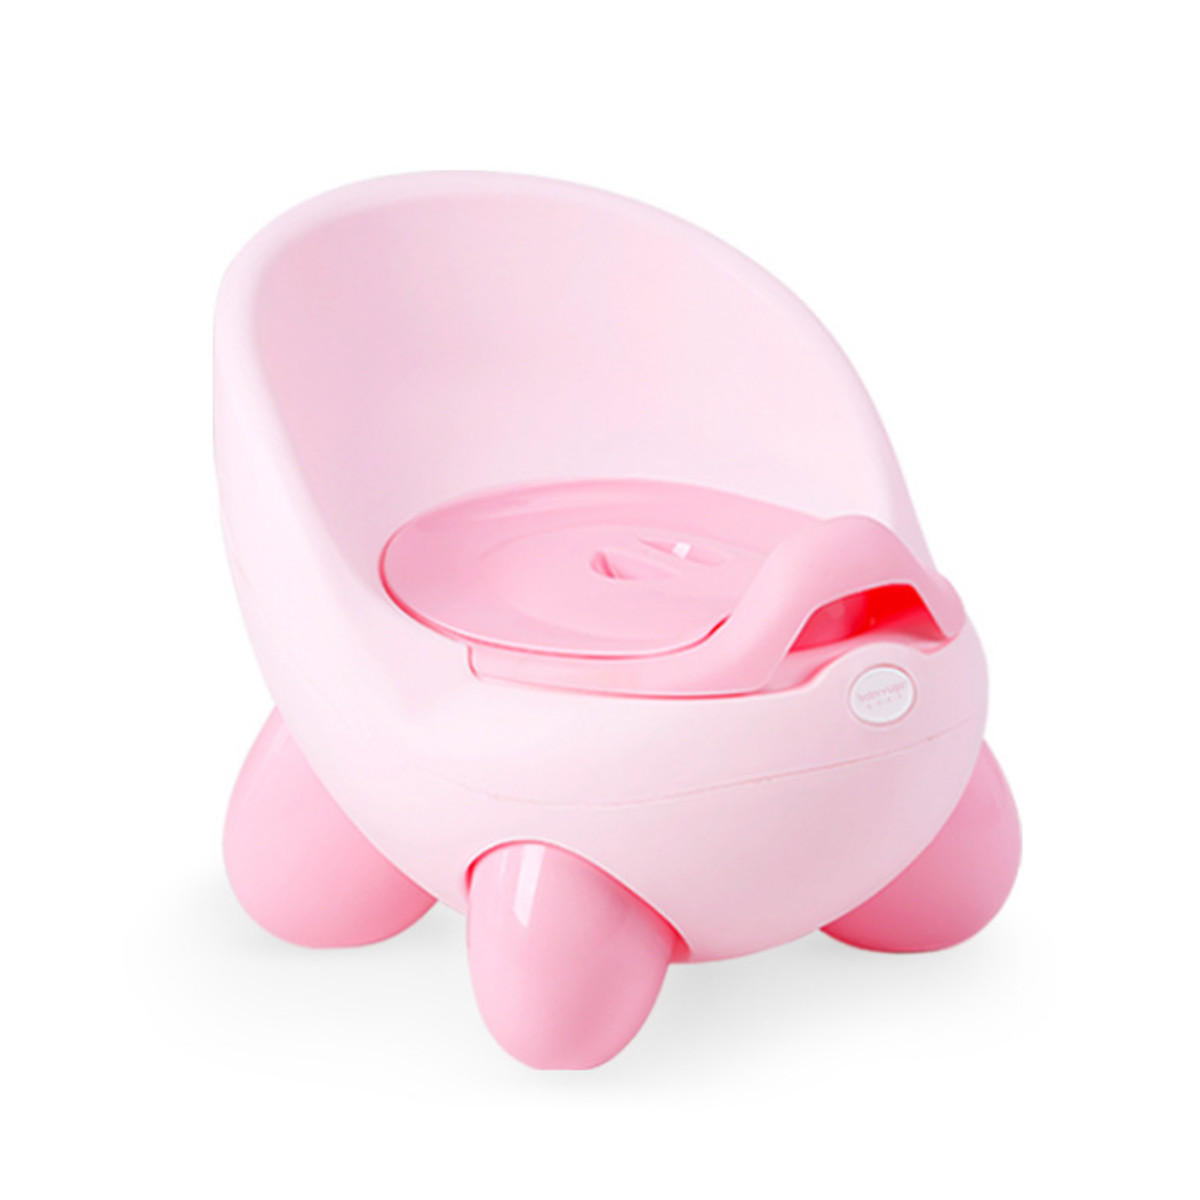 Portable Baby Kids Potty Training Chair Toilet Seat Outdoor Emergency Camping Travel